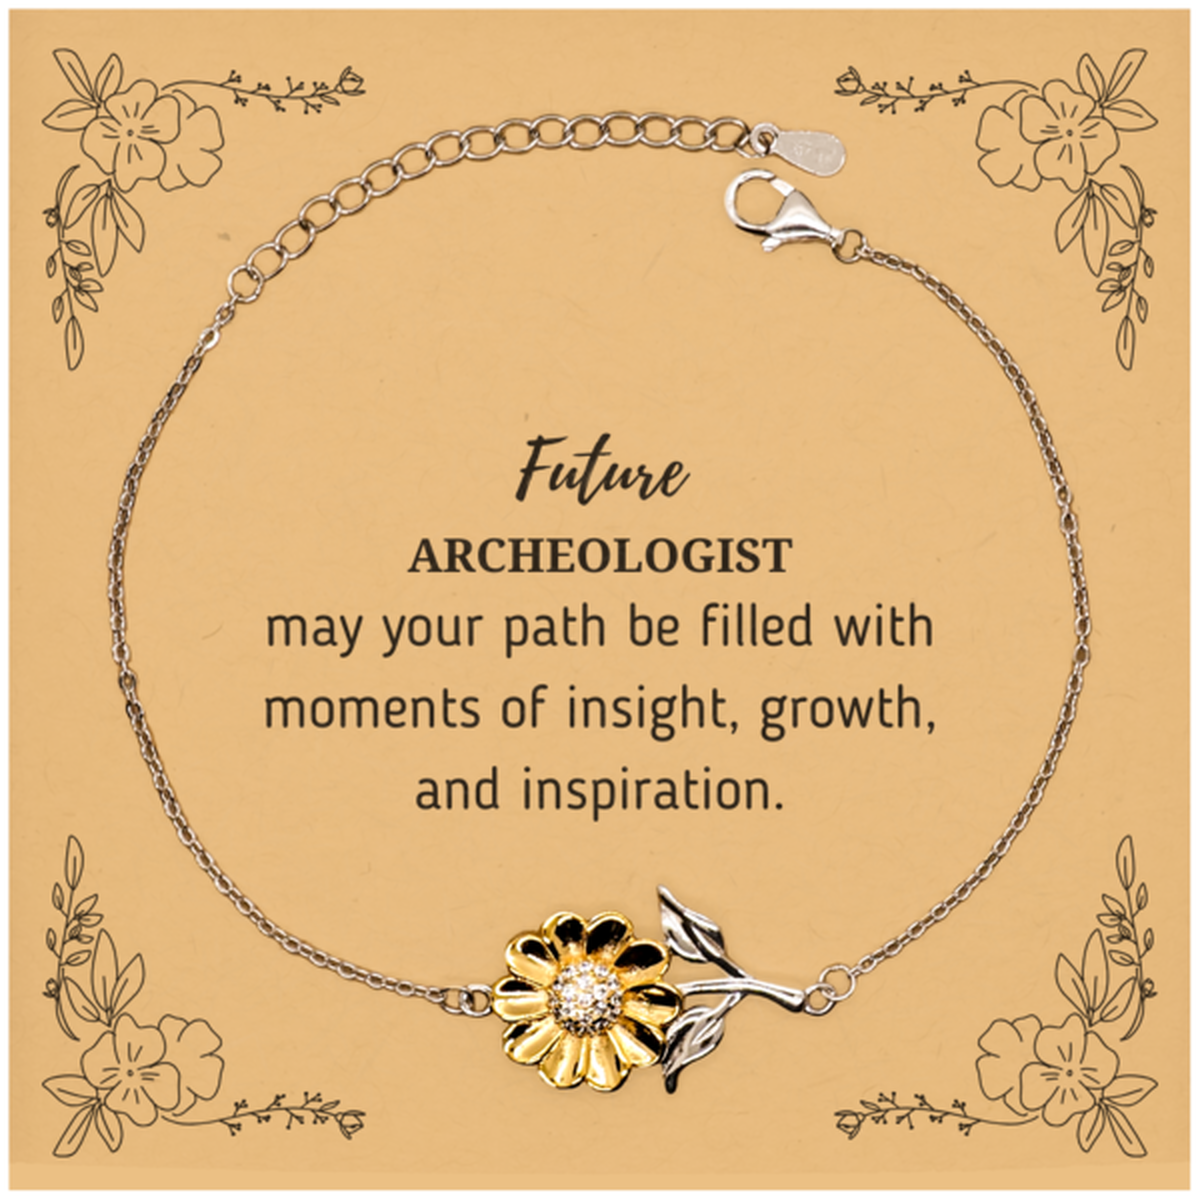 Future Archeologist Gifts, May your path be filled with moments of insight, Graduation Gifts for New Archeologist, Christmas Unique Sunflower Bracelet For Men, Women, Friends